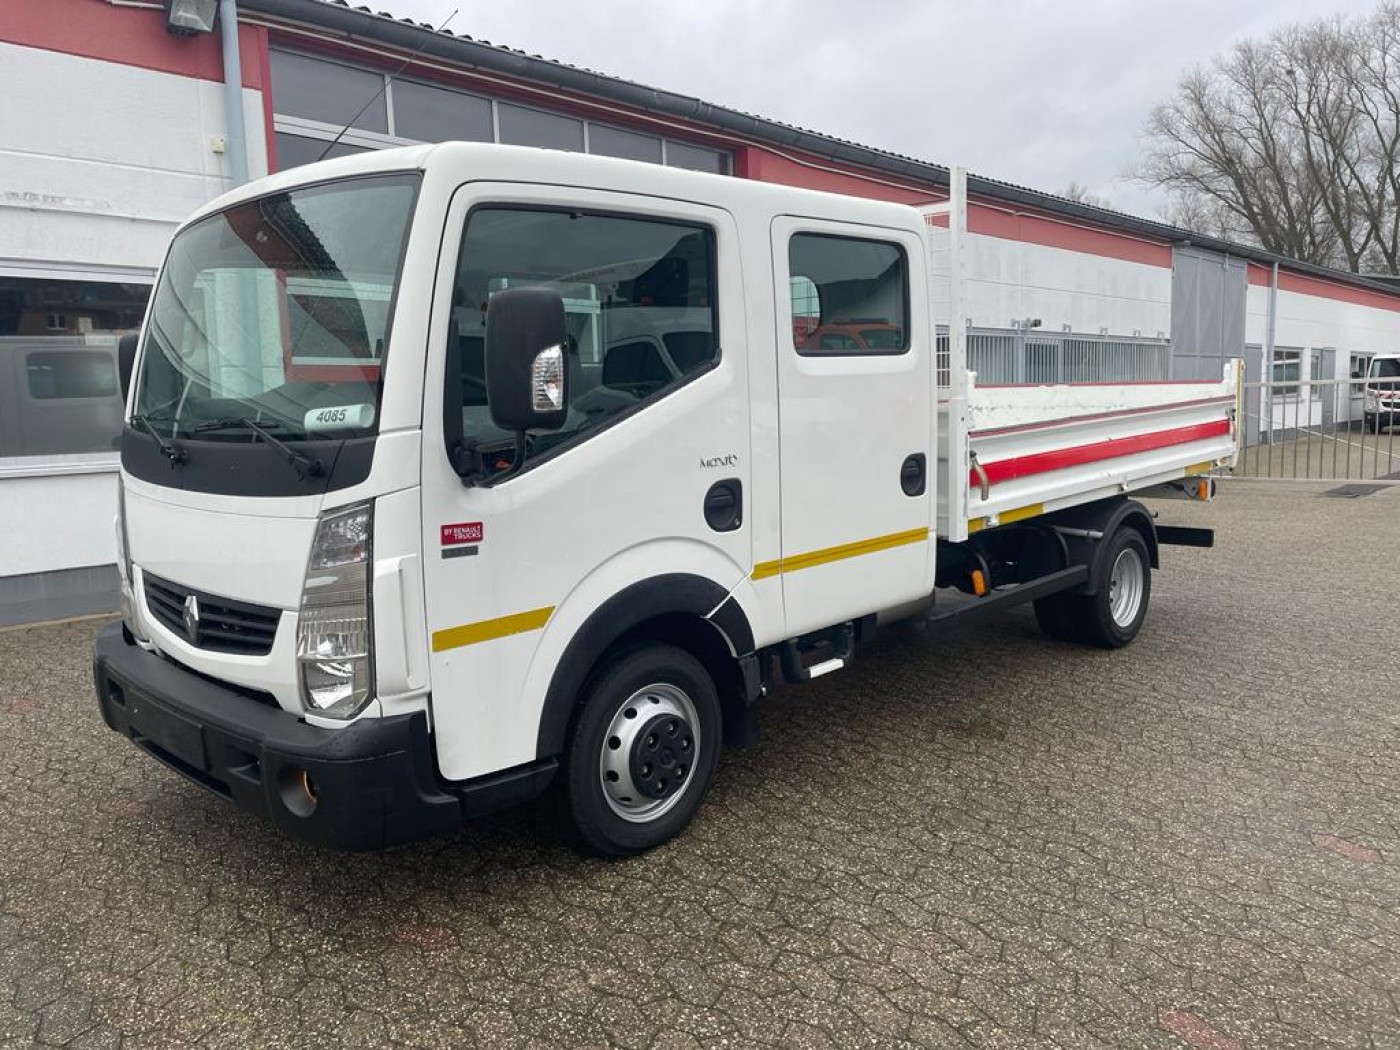 Renault - Maxity tipper double cab 1100 kg Payload!